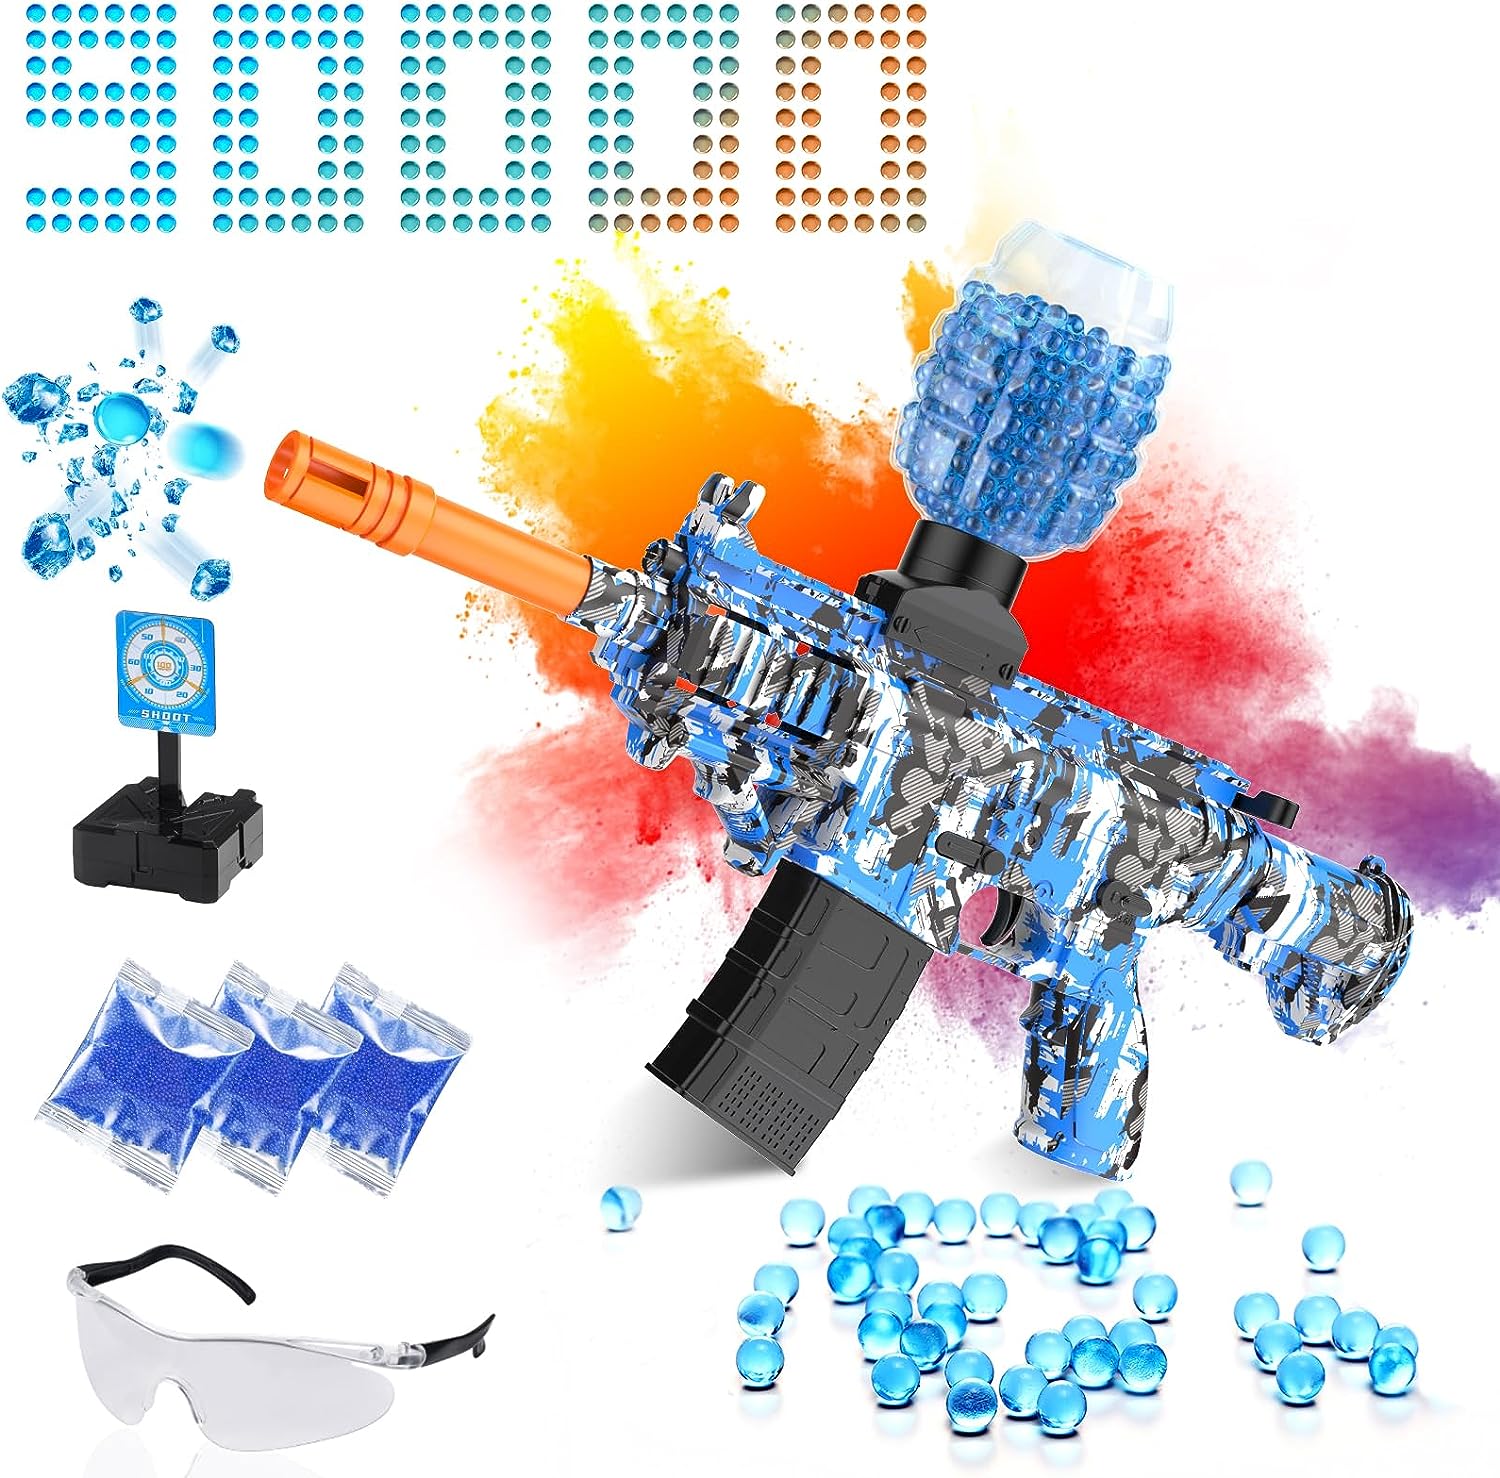 ELECTRIC GEL BALL BLASTER, featuring a blue orbeez gun and other items. An ELECTRIC GEL BALL BLASTER, featuring a blue gun and other items.